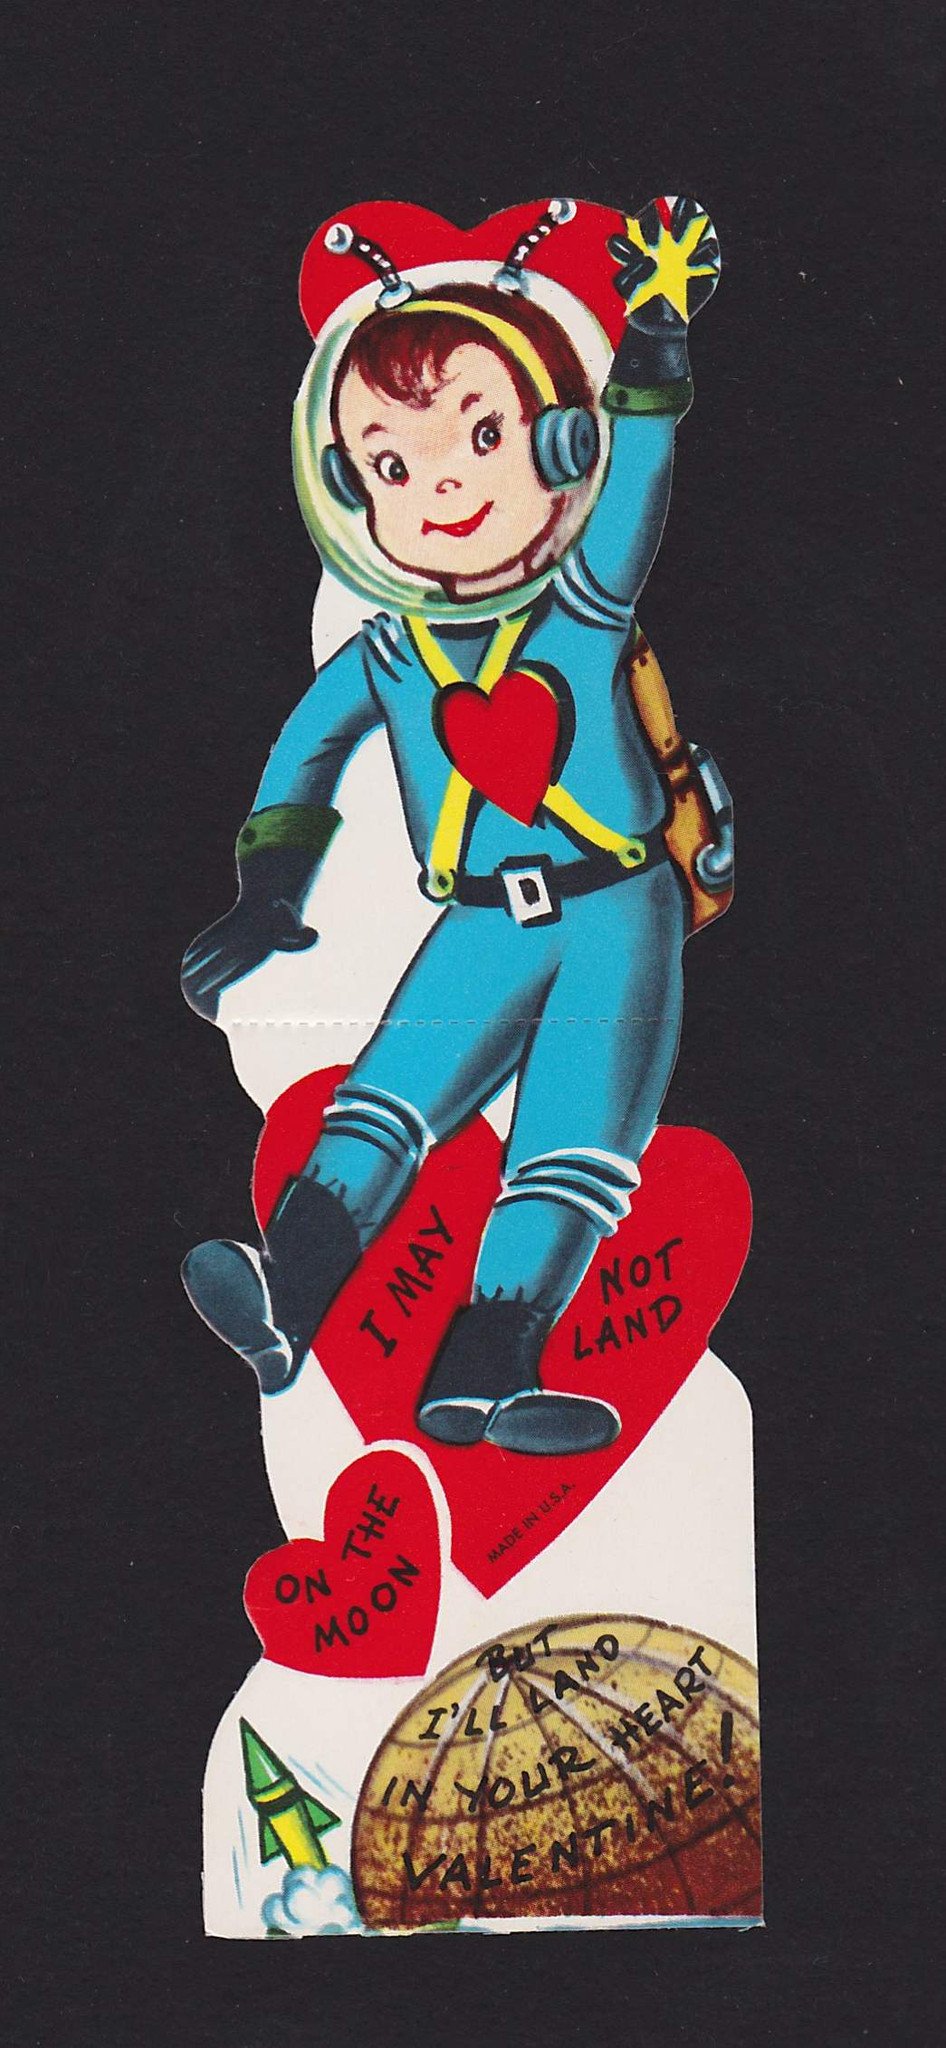 Cute Space Boy Astronaut Vintage 1950s Valentine's Day Greeting Card